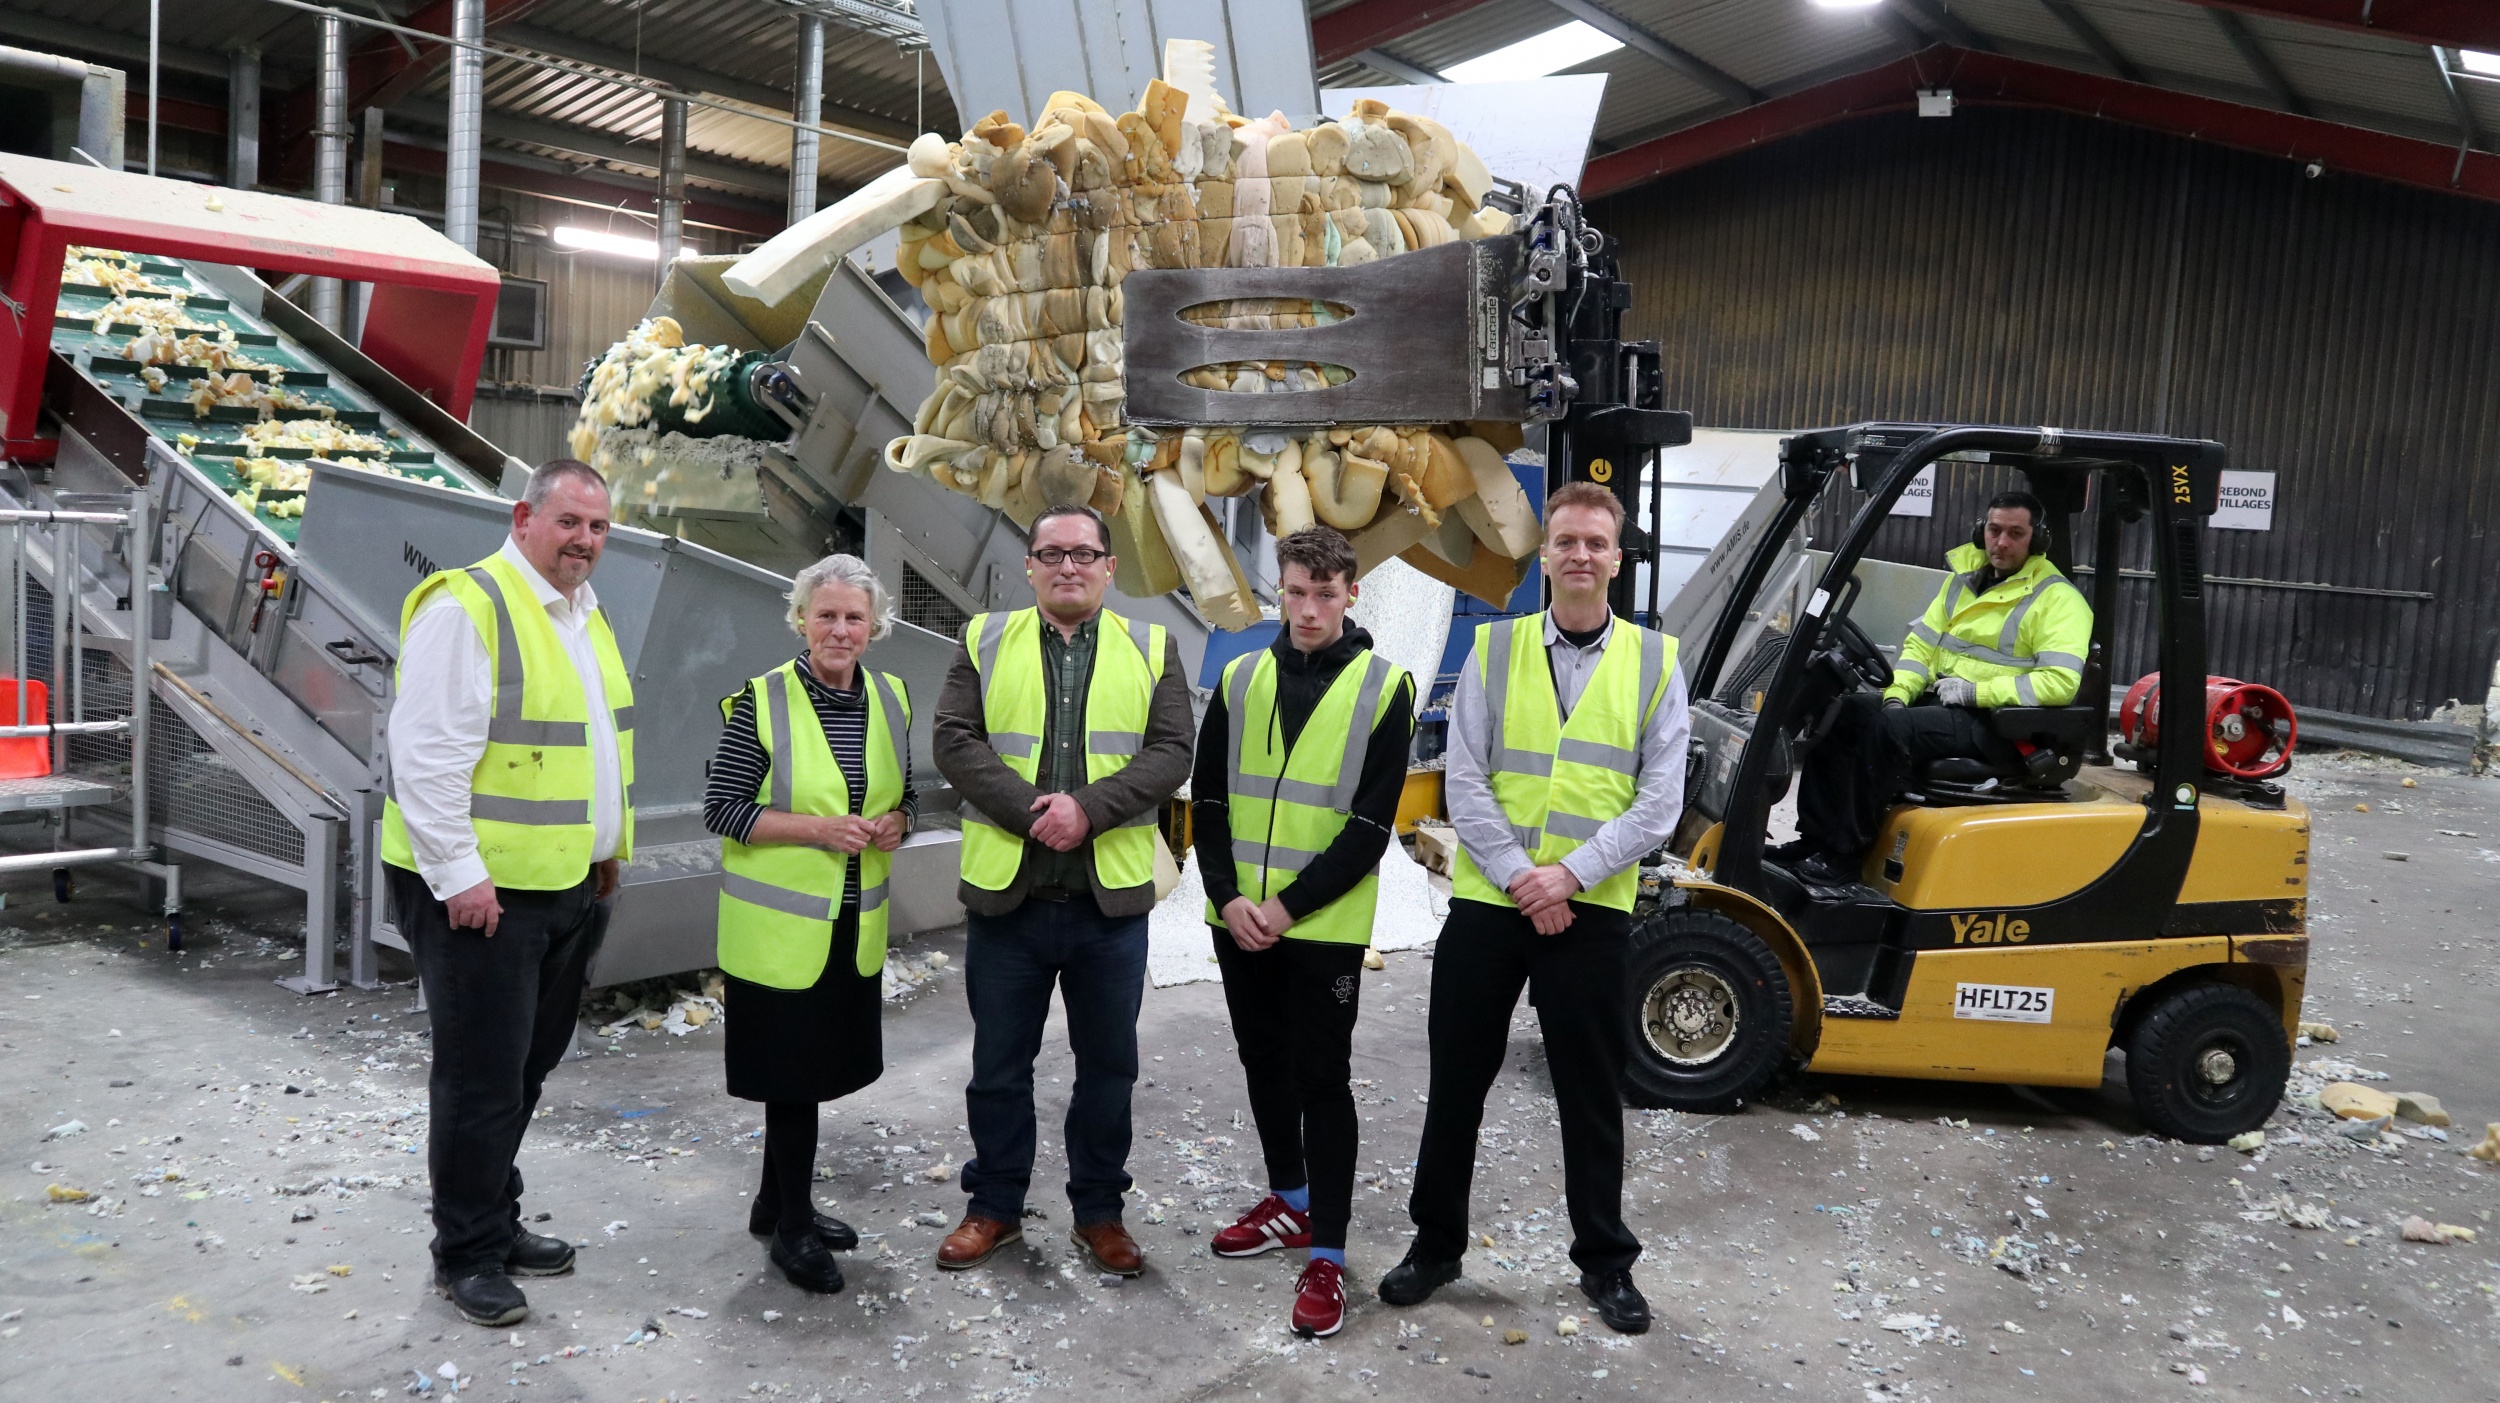 From left, Gary McEwan, Alyson Barnes, Paul Becouran (Active Lancashire Project Officer), new recruit Dylan and Cliff Adamson (Active Lancashire Employment Officer).